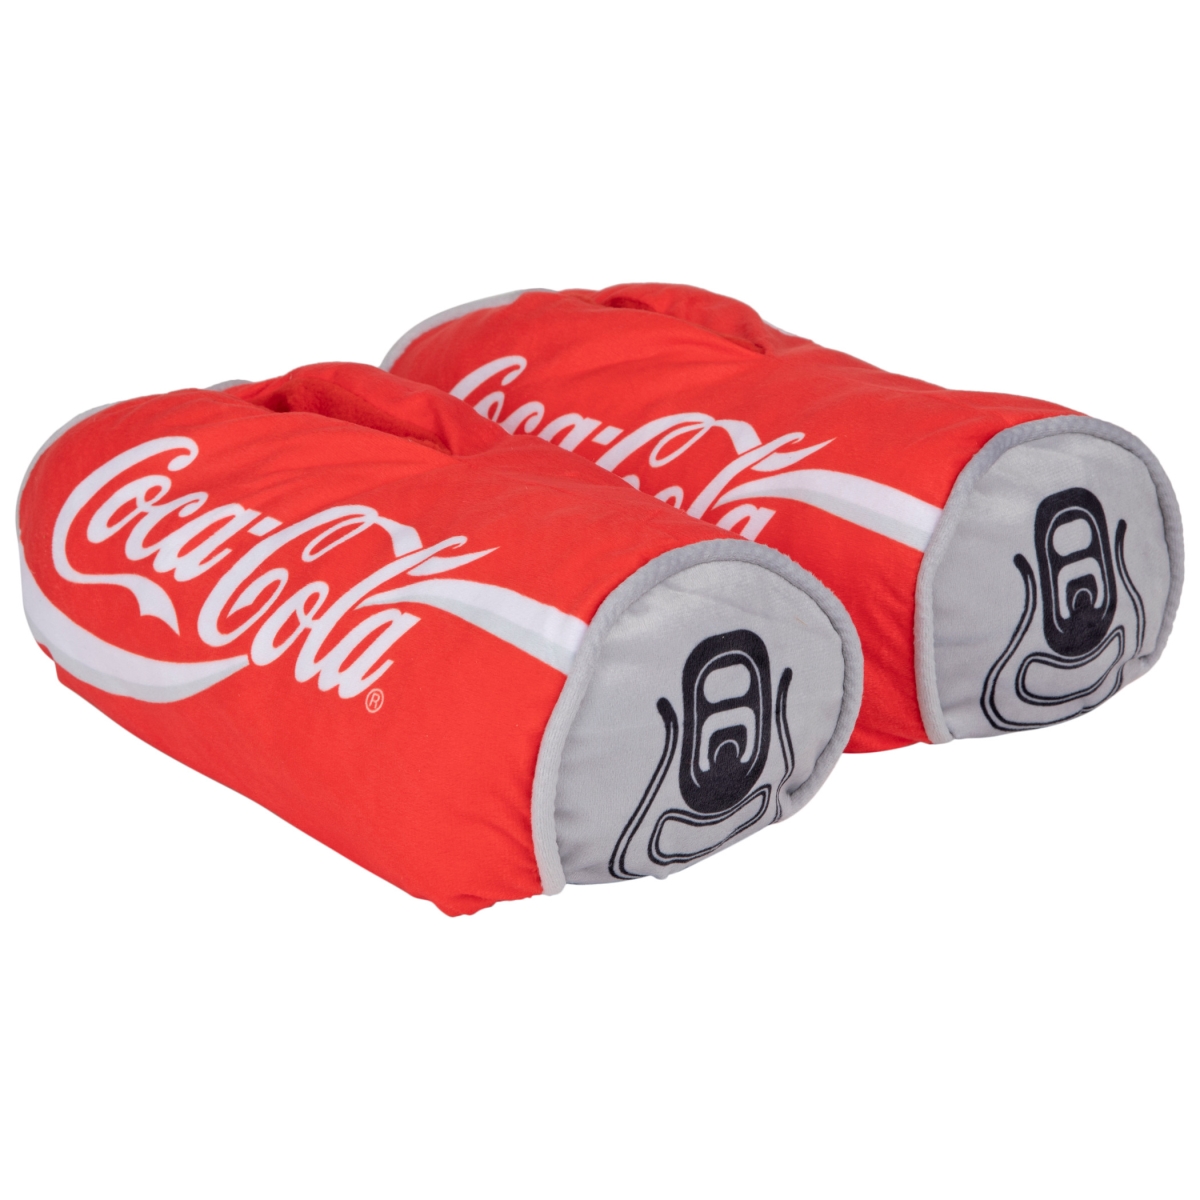 Picture of Coca-Cola 849053-ge-xlarge Coca-Cola Classic Can Shaped Slippers - Large & Extra Large